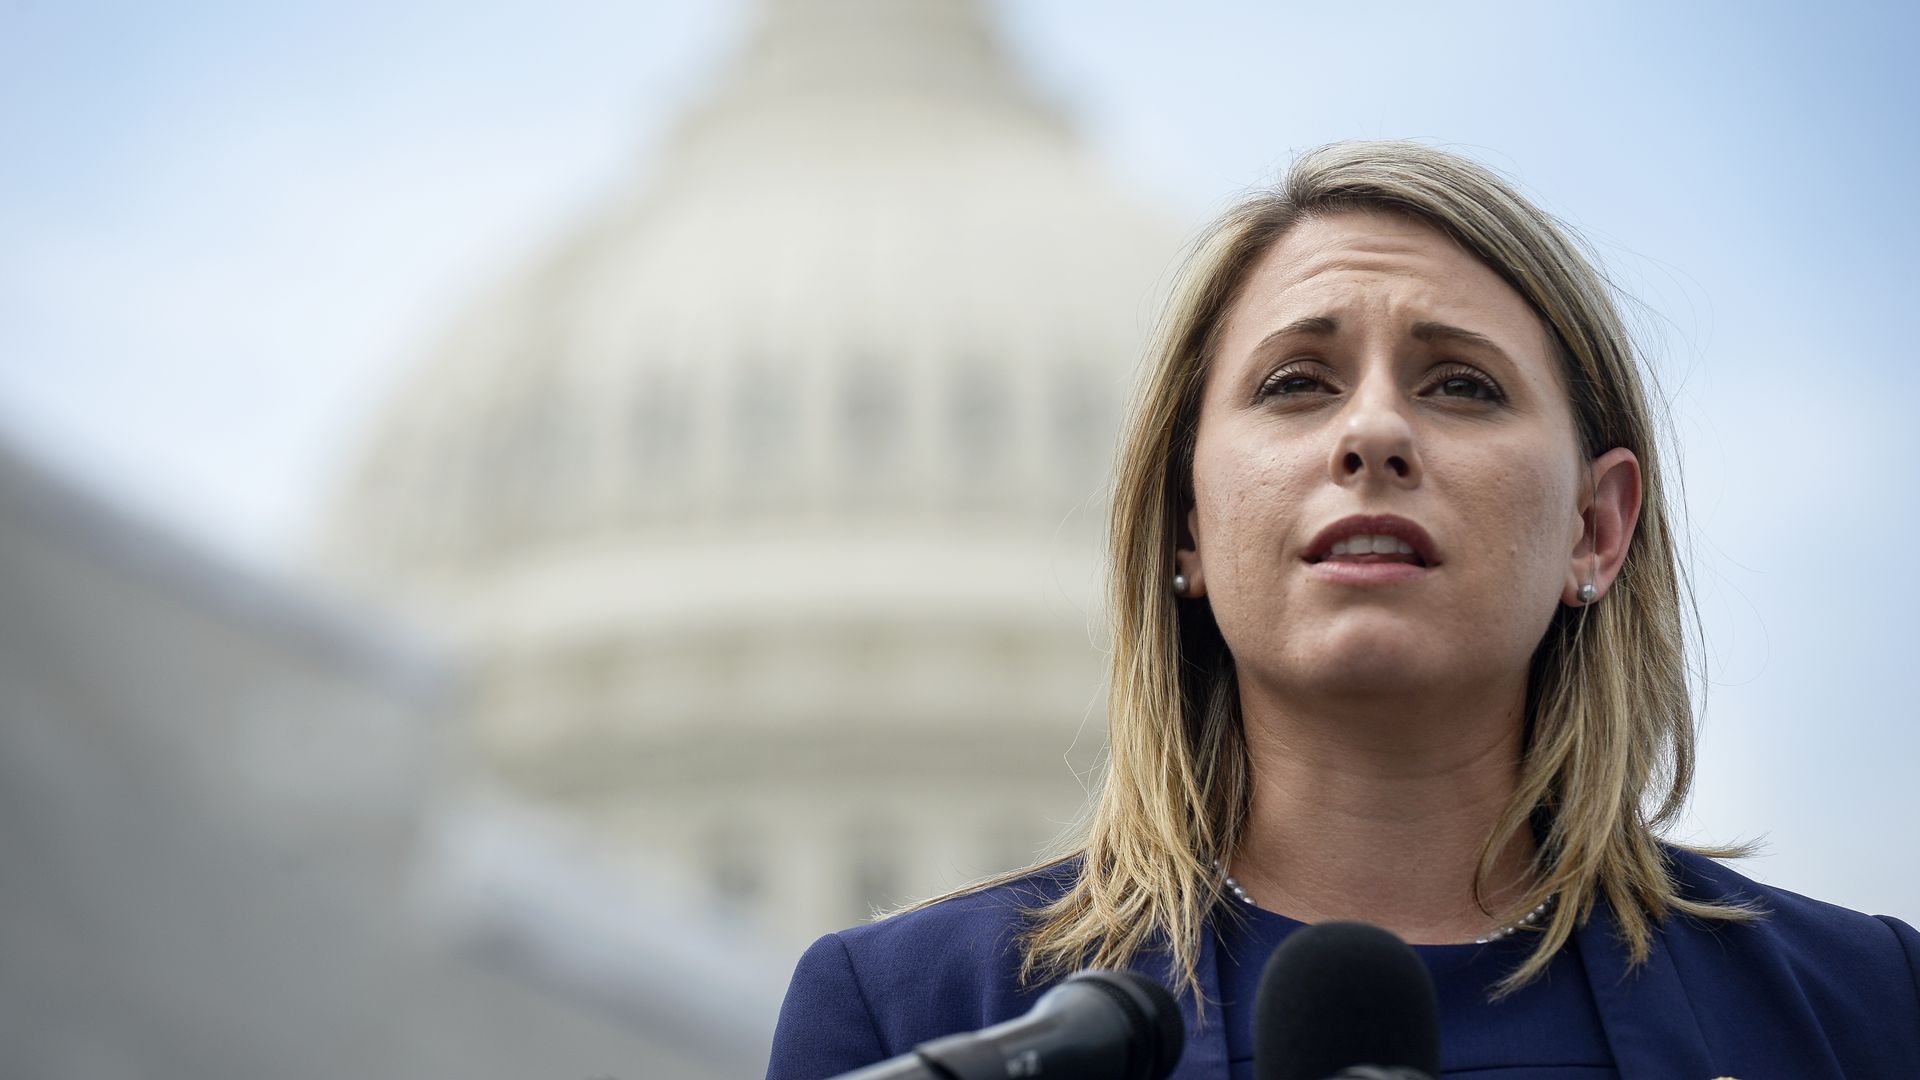  Rep. Katie Hill, D-Calif., speaks at a press conference to introduce ACTION for National Service outside of the Capitol on Tuesday June 25